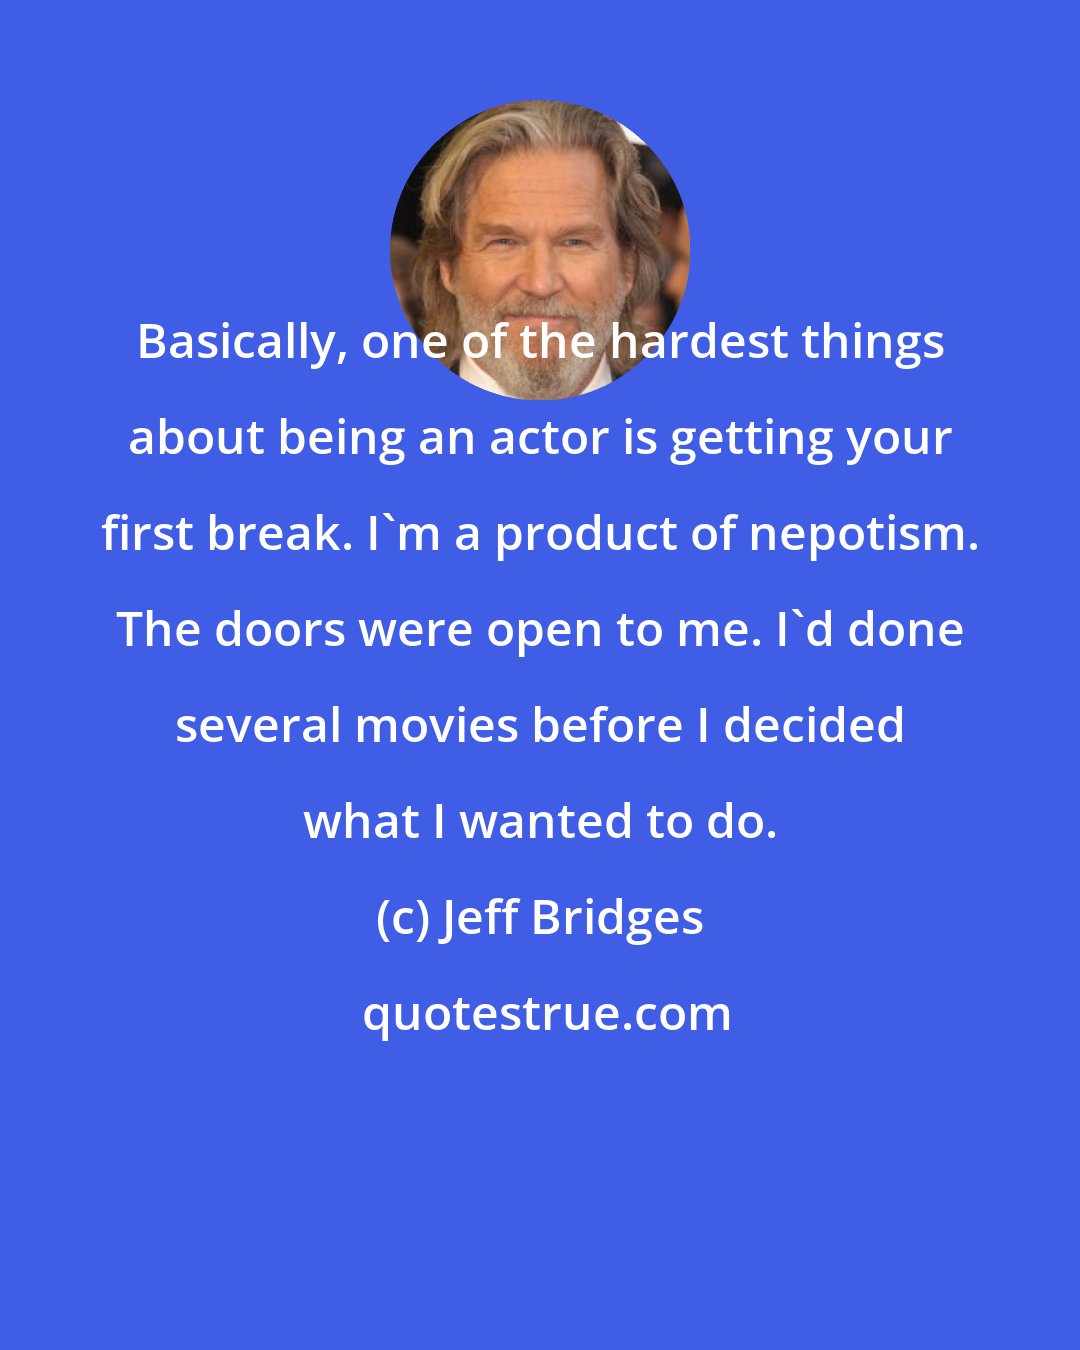 Jeff Bridges: Basically, one of the hardest things about being an actor is getting your first break. I'm a product of nepotism. The doors were open to me. I'd done several movies before I decided what I wanted to do.